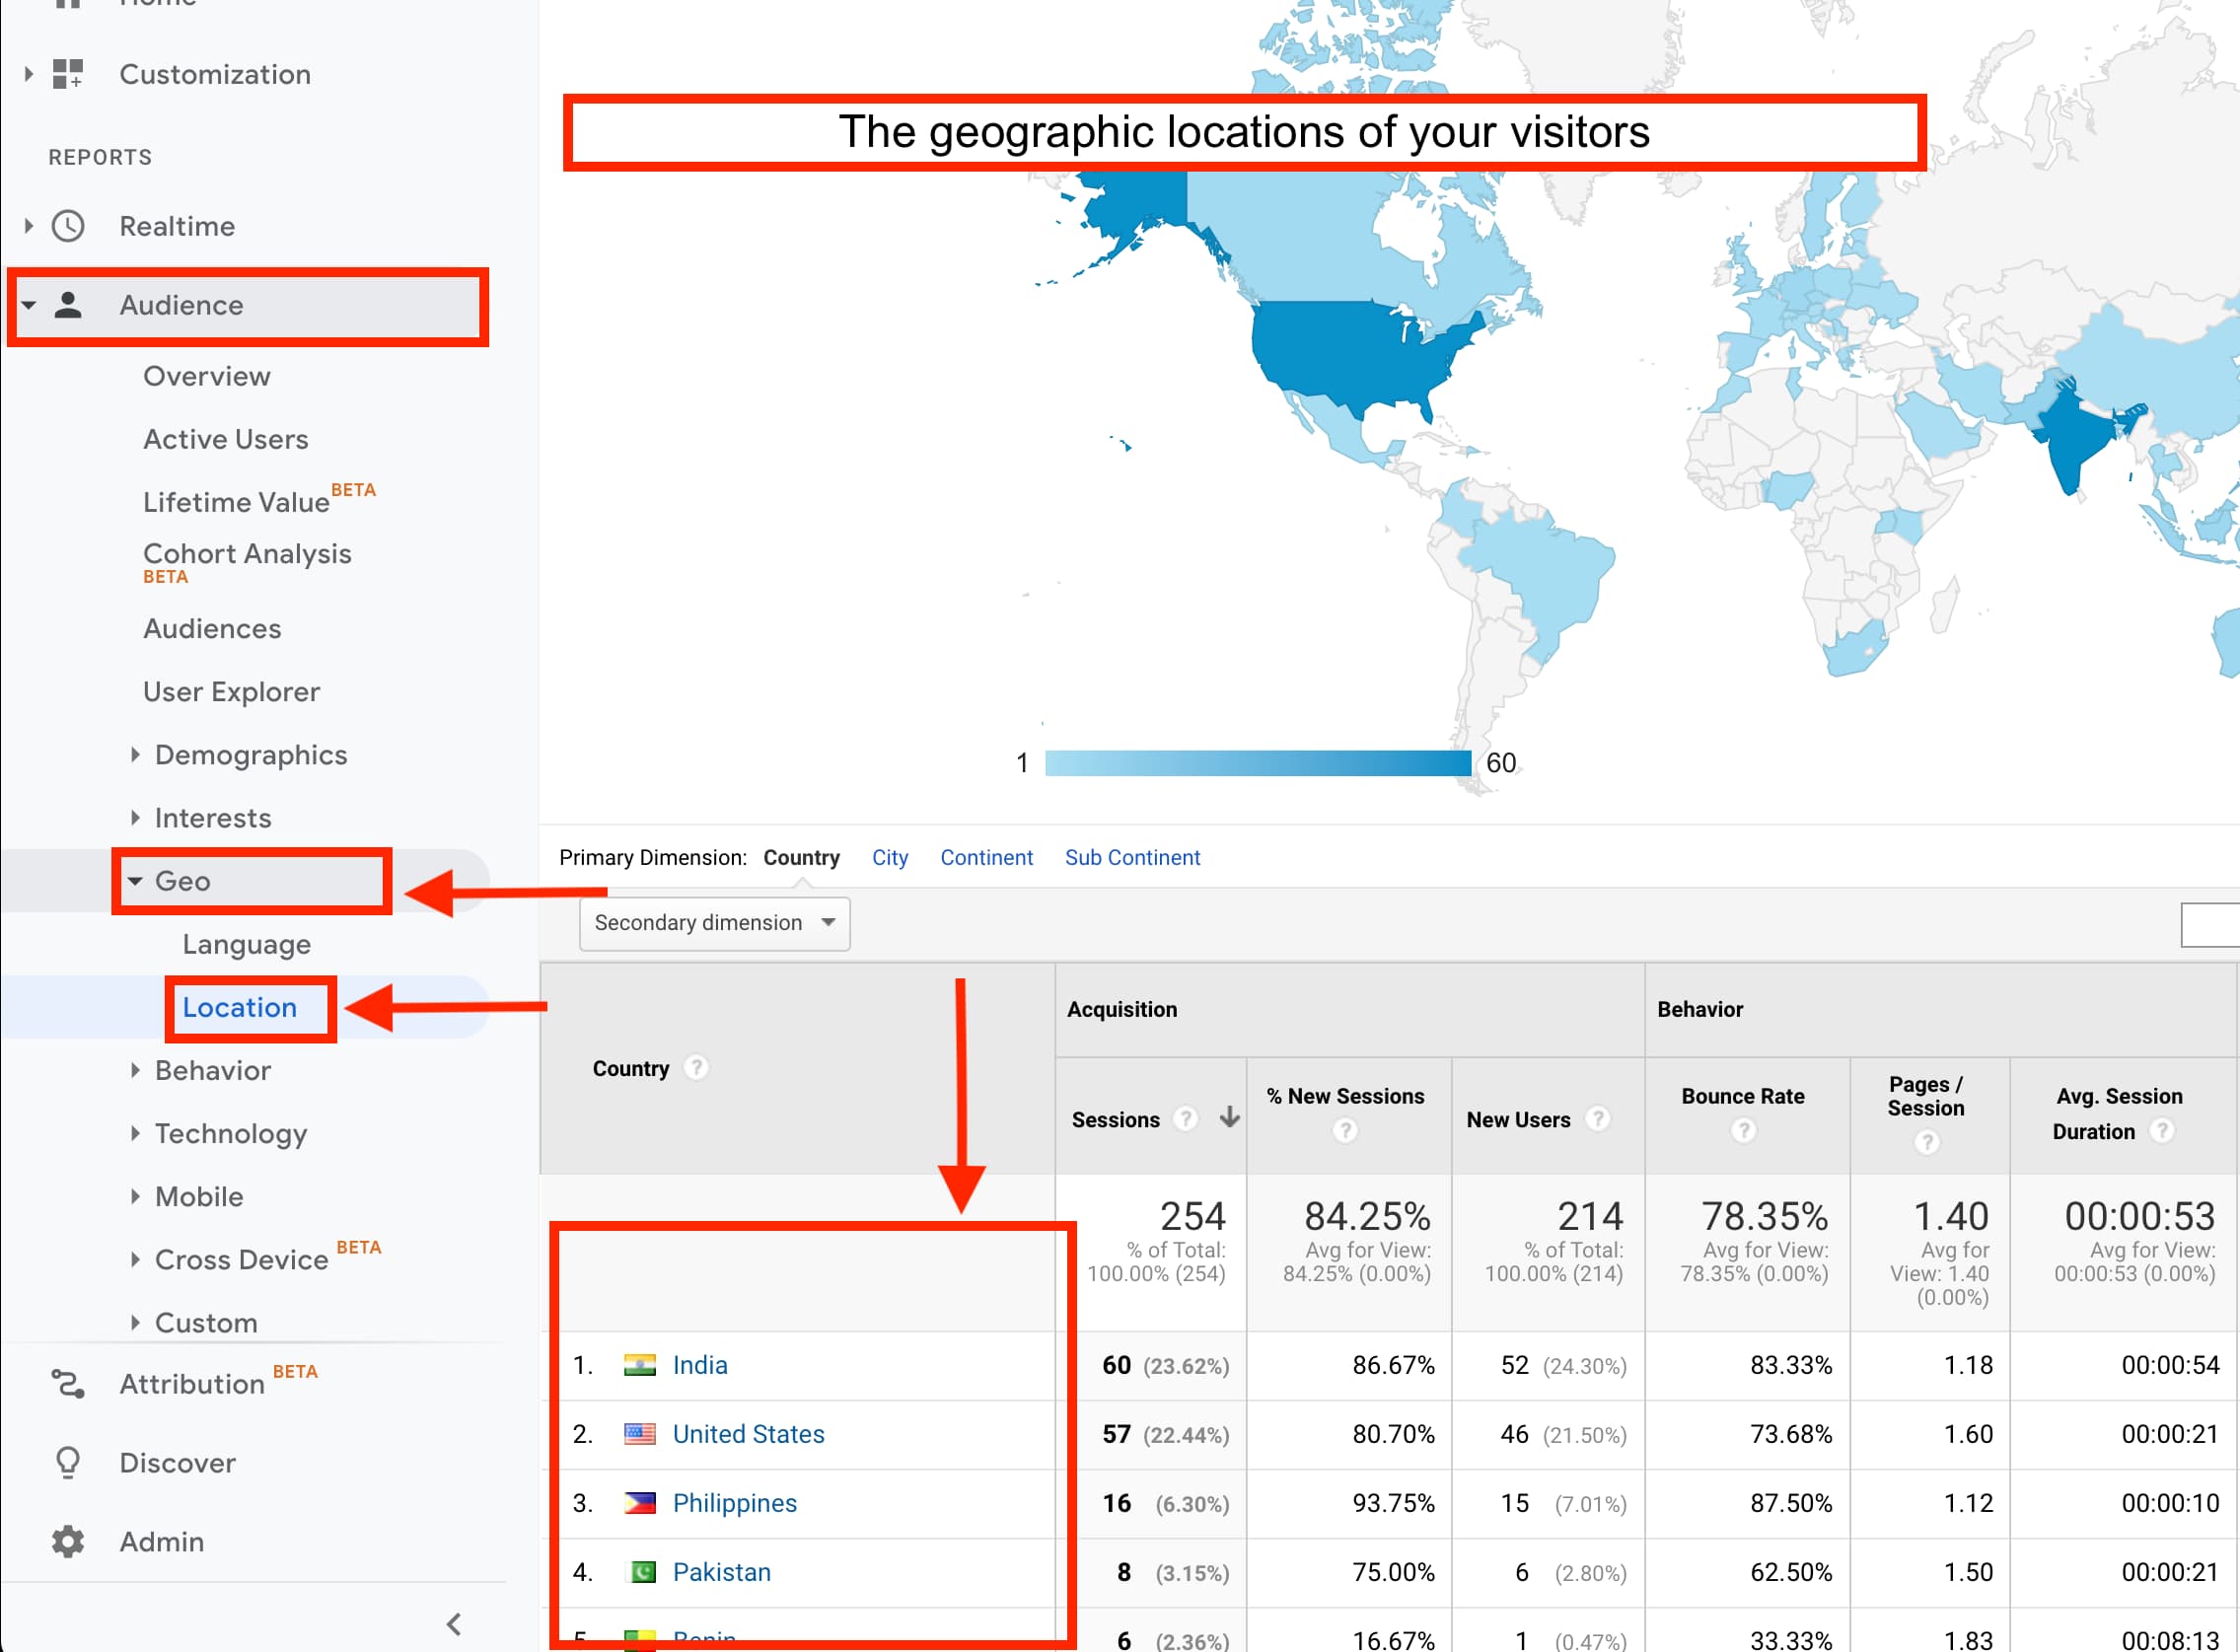 The geographic locations of your visitors in Google Analytics